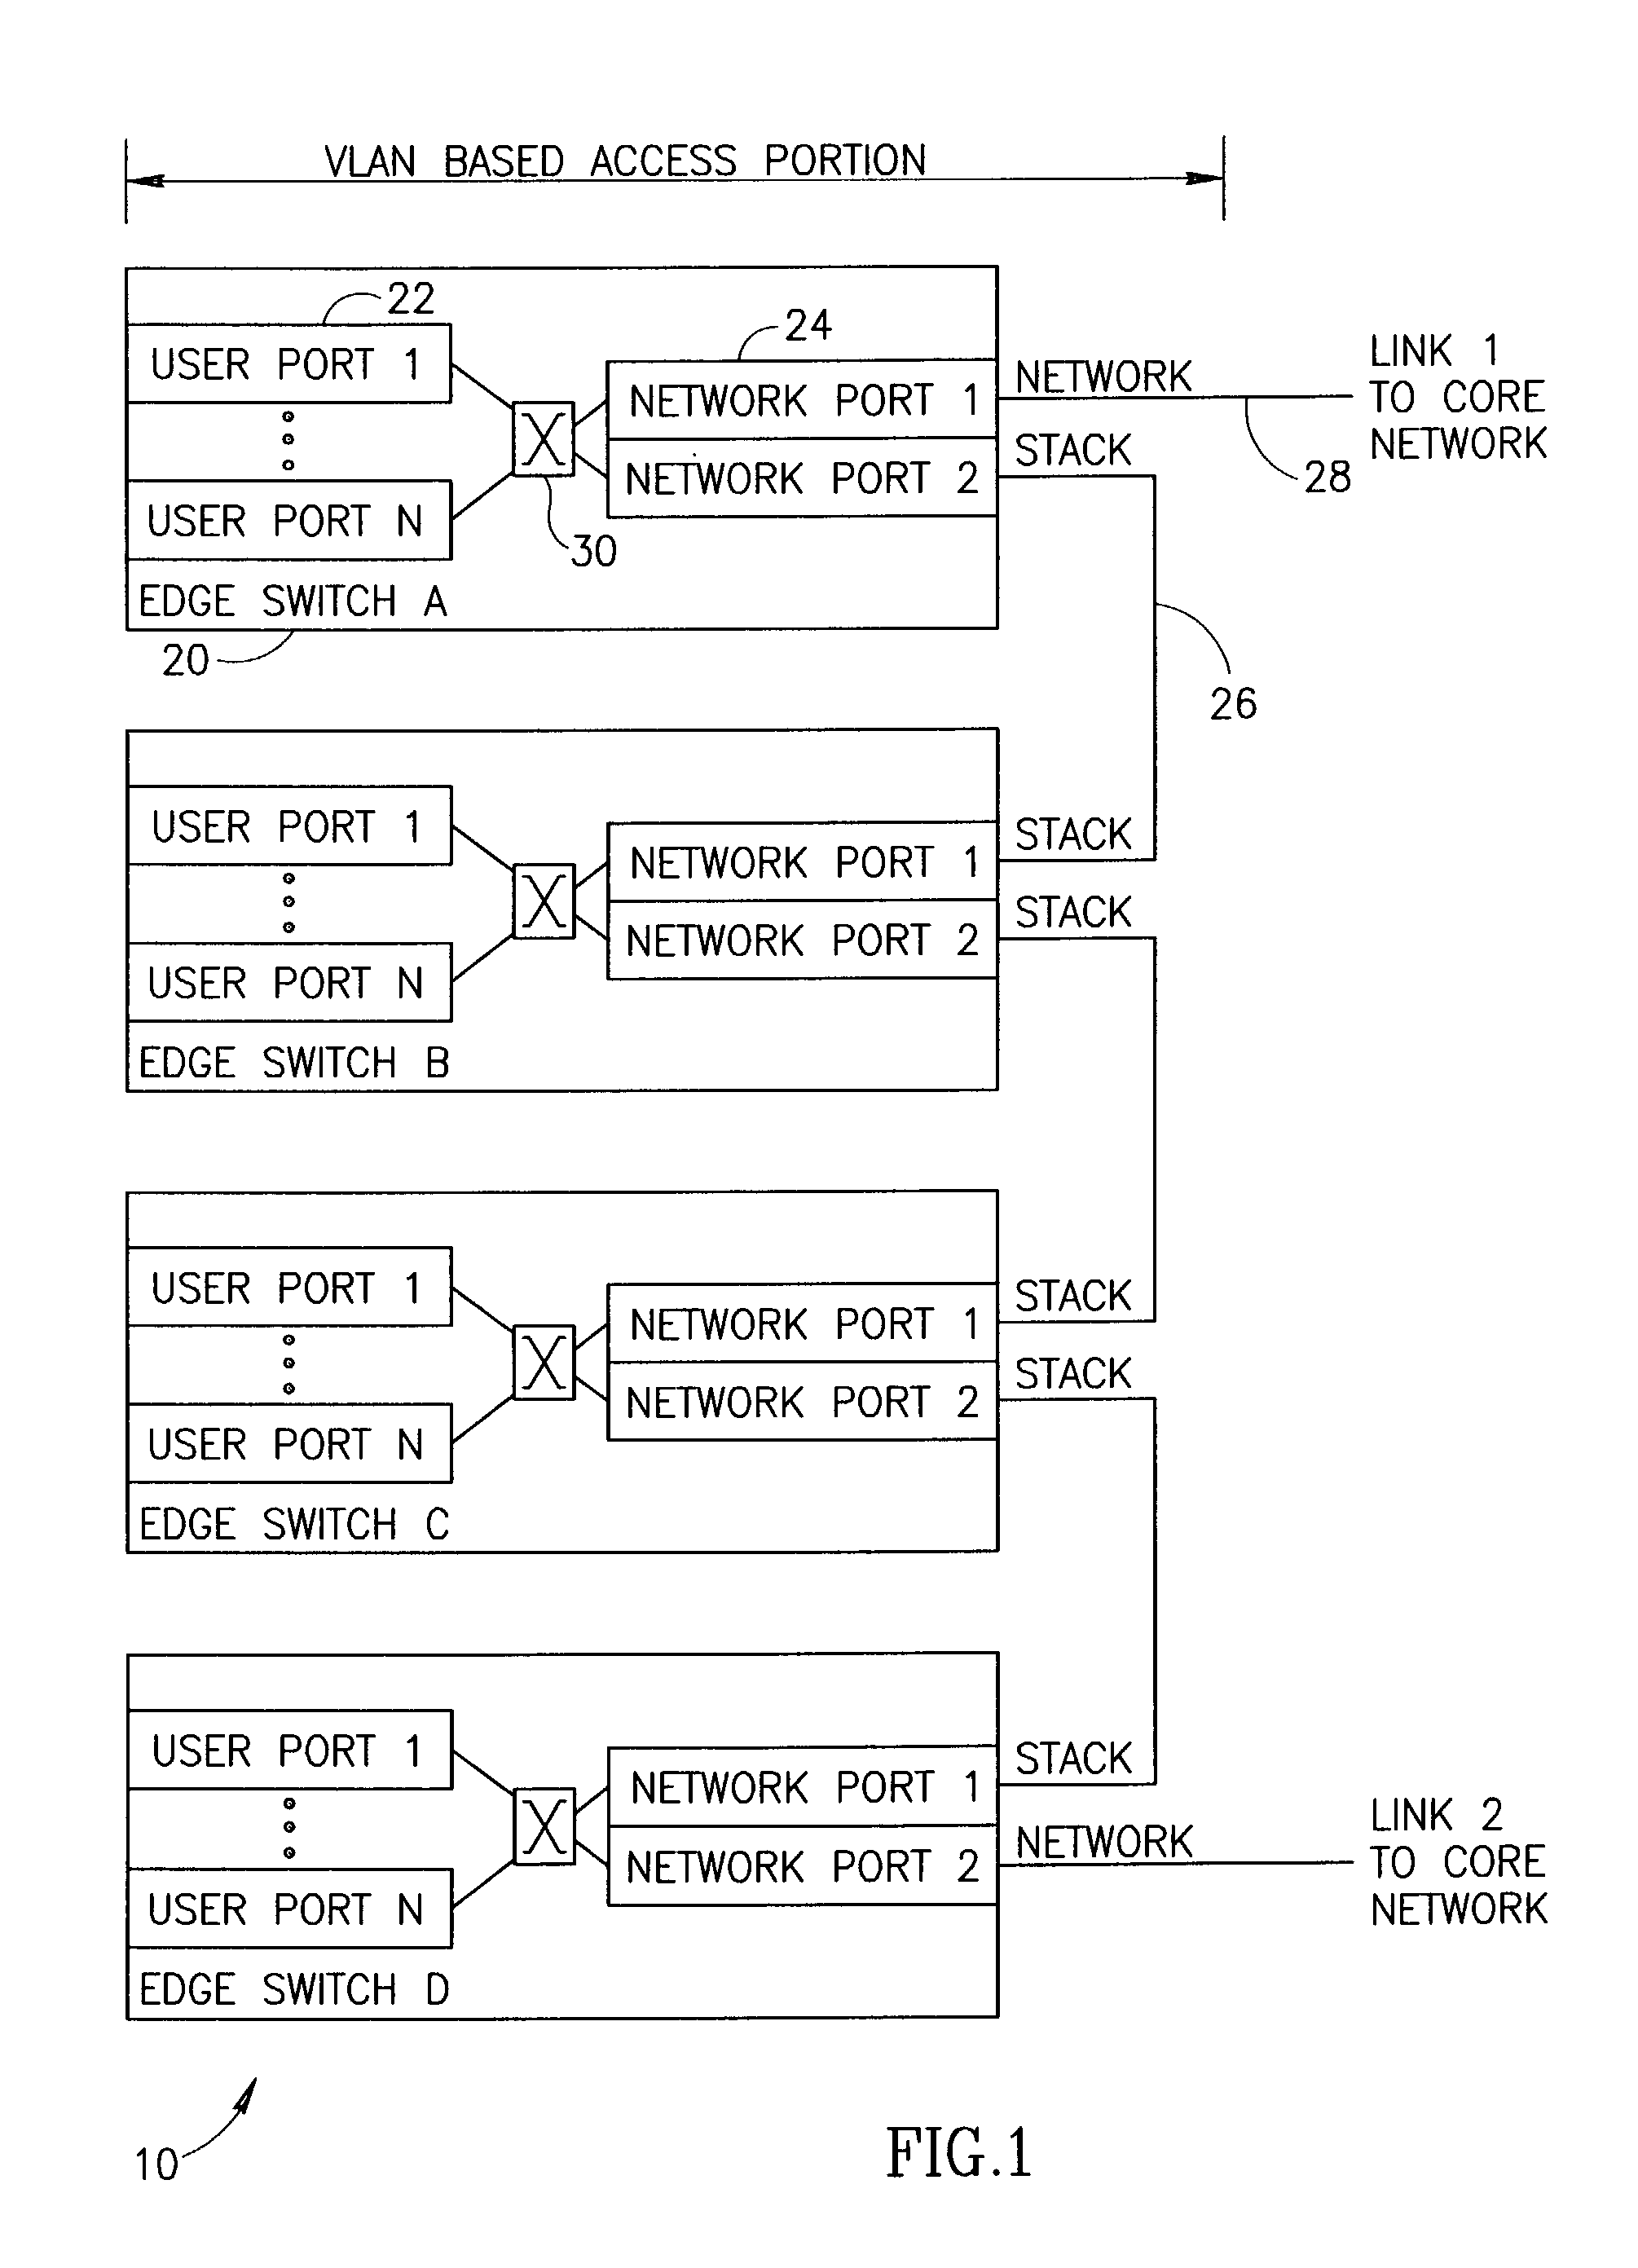 Fast connection protection in a virtual local area network based stack environment